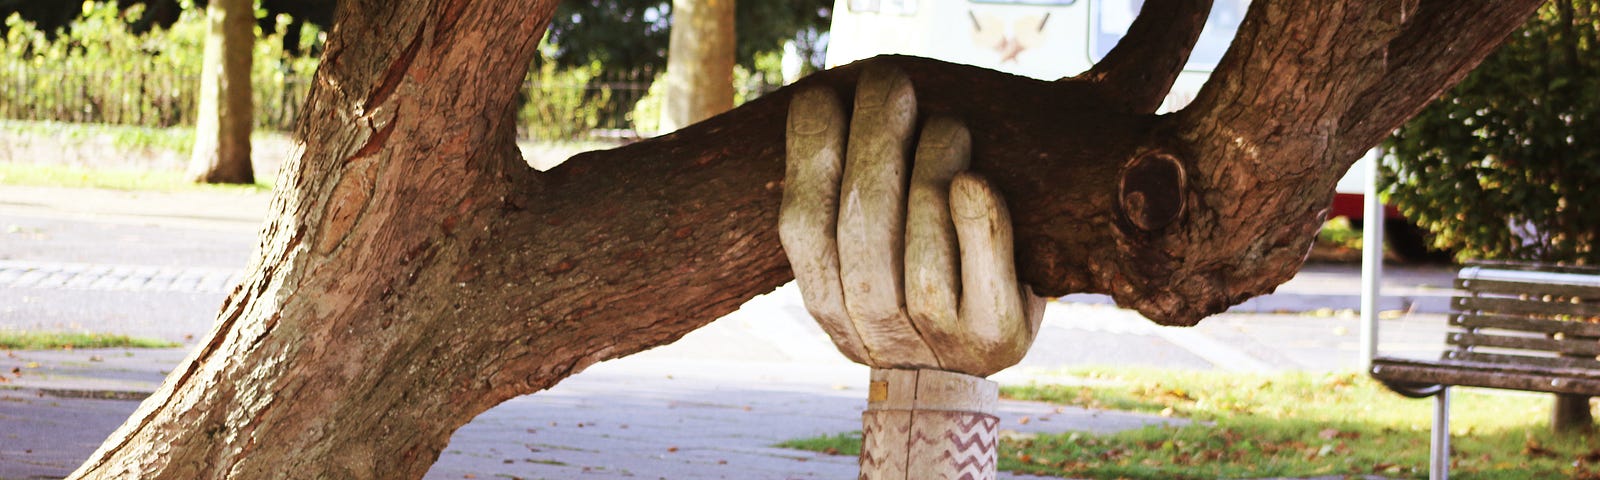 Tree supported by a large sculpted hand